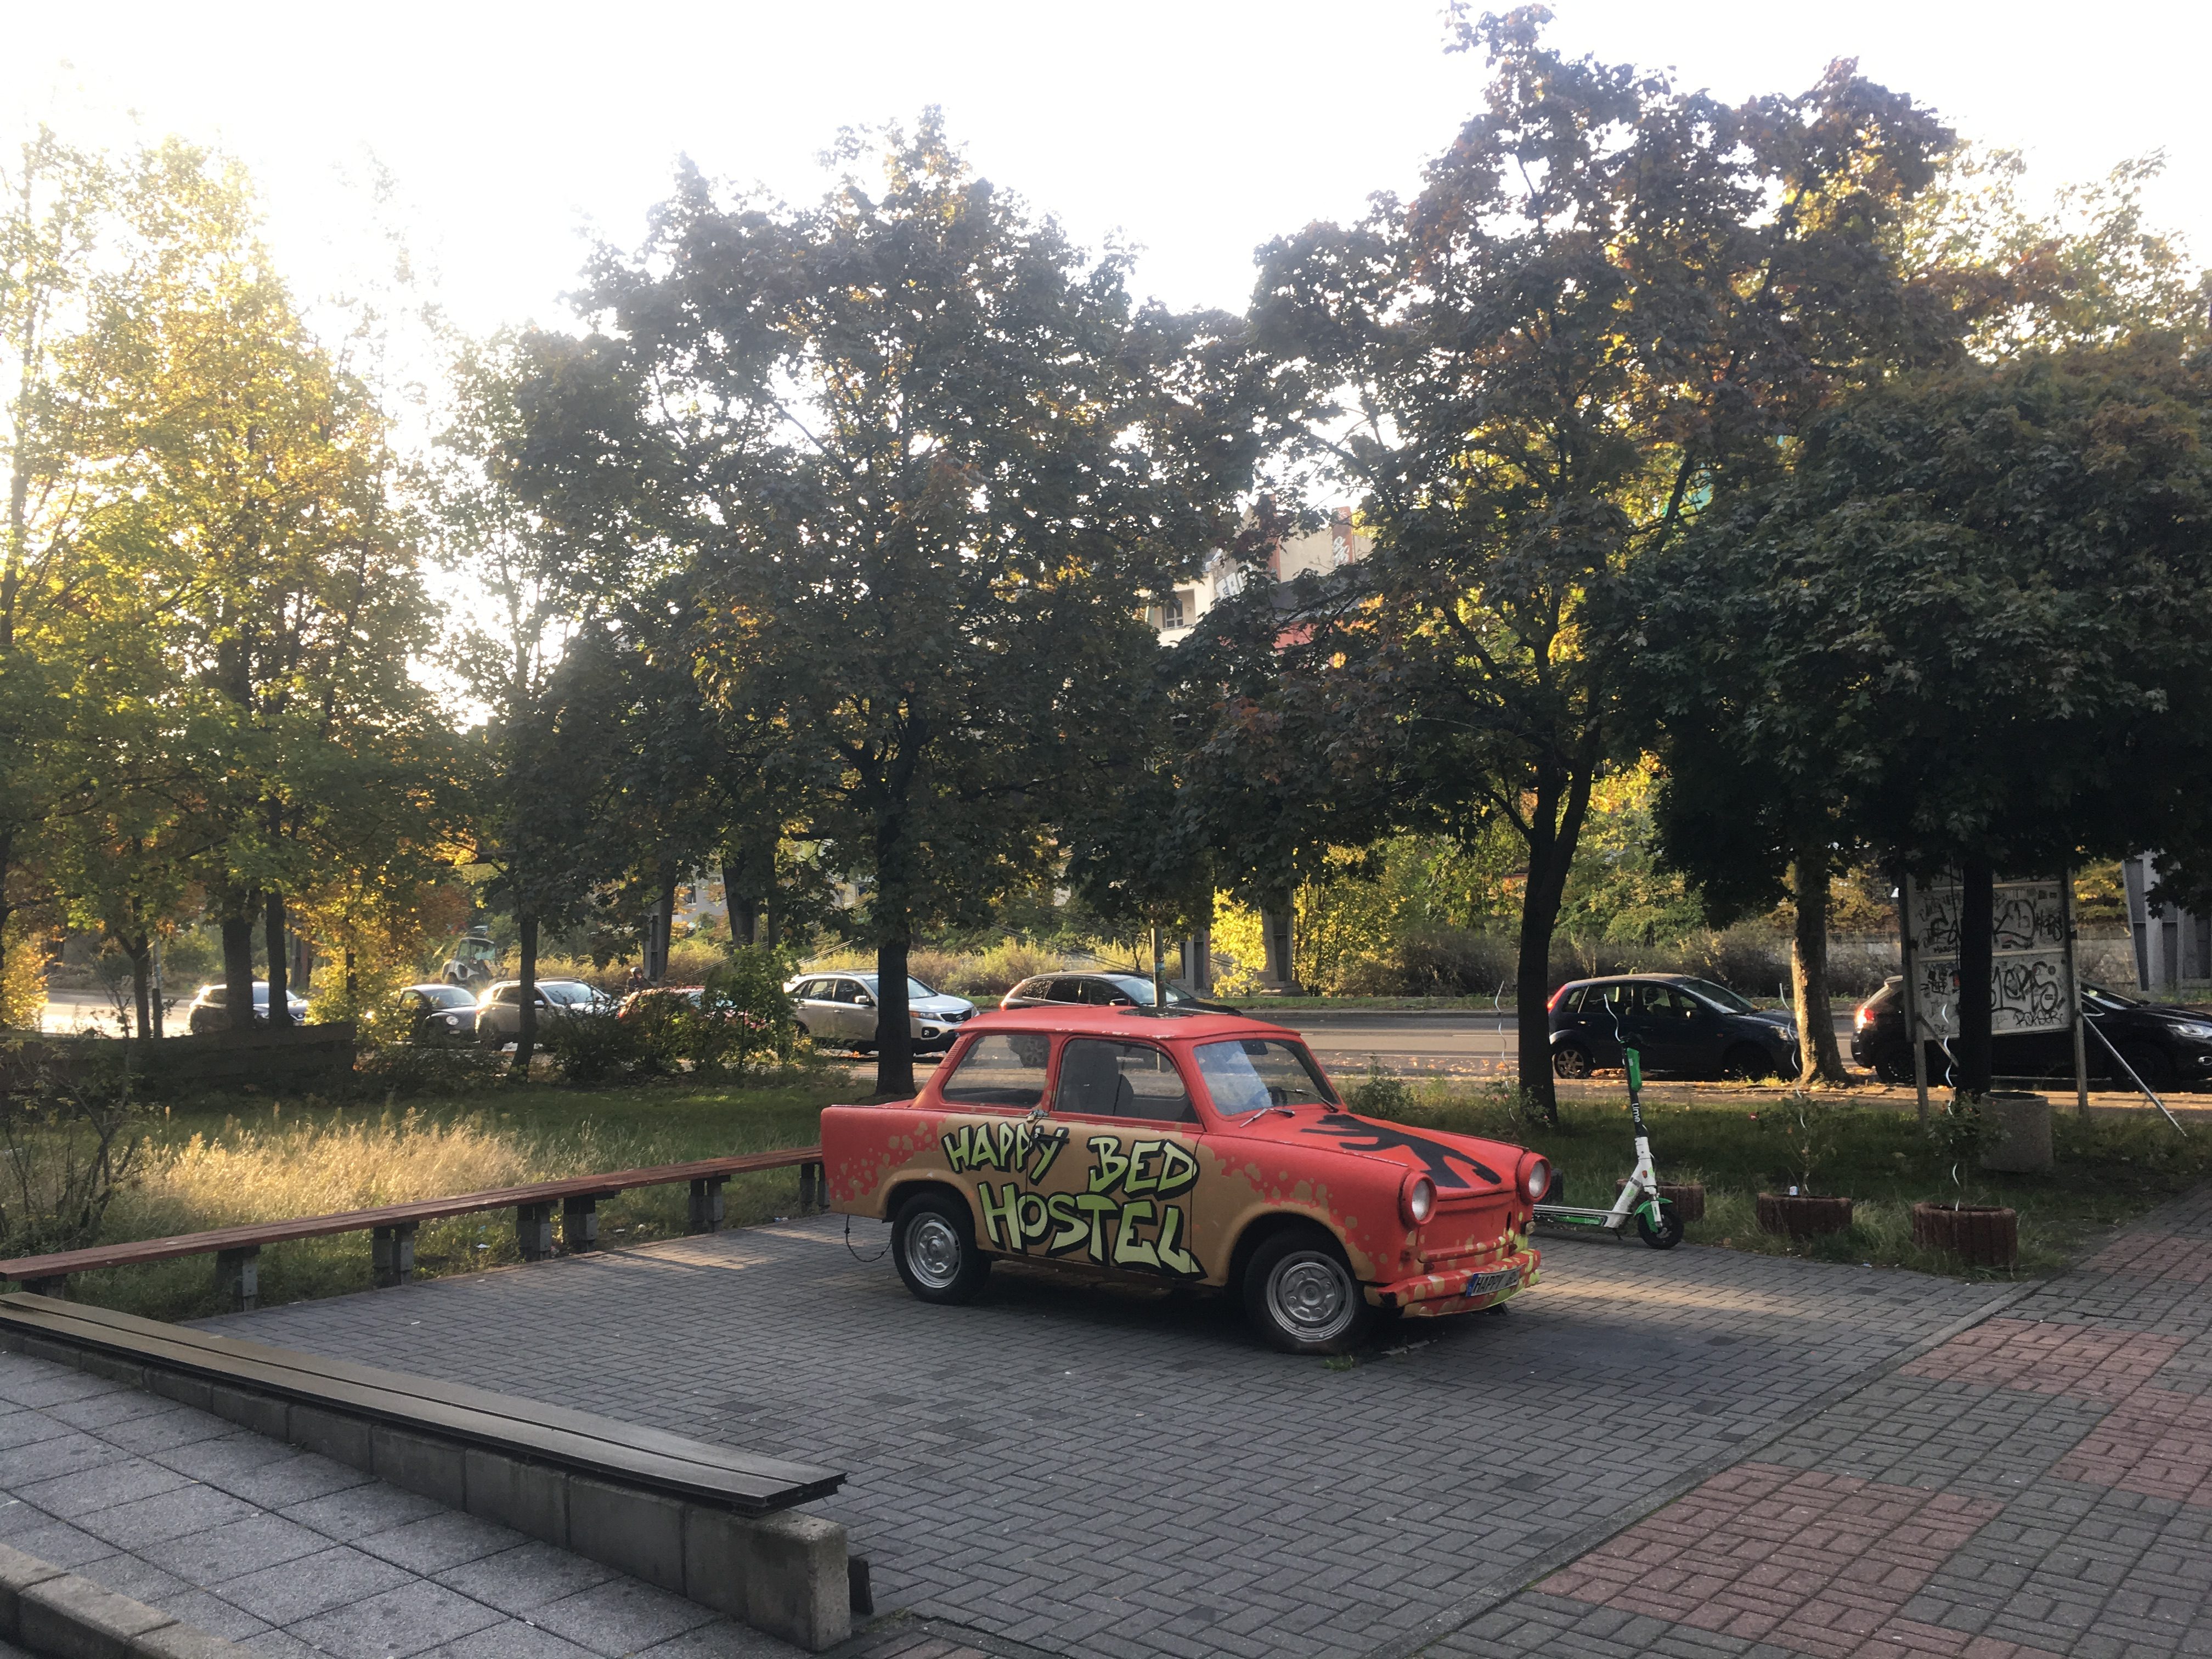 The renowned Trabant outside hostel